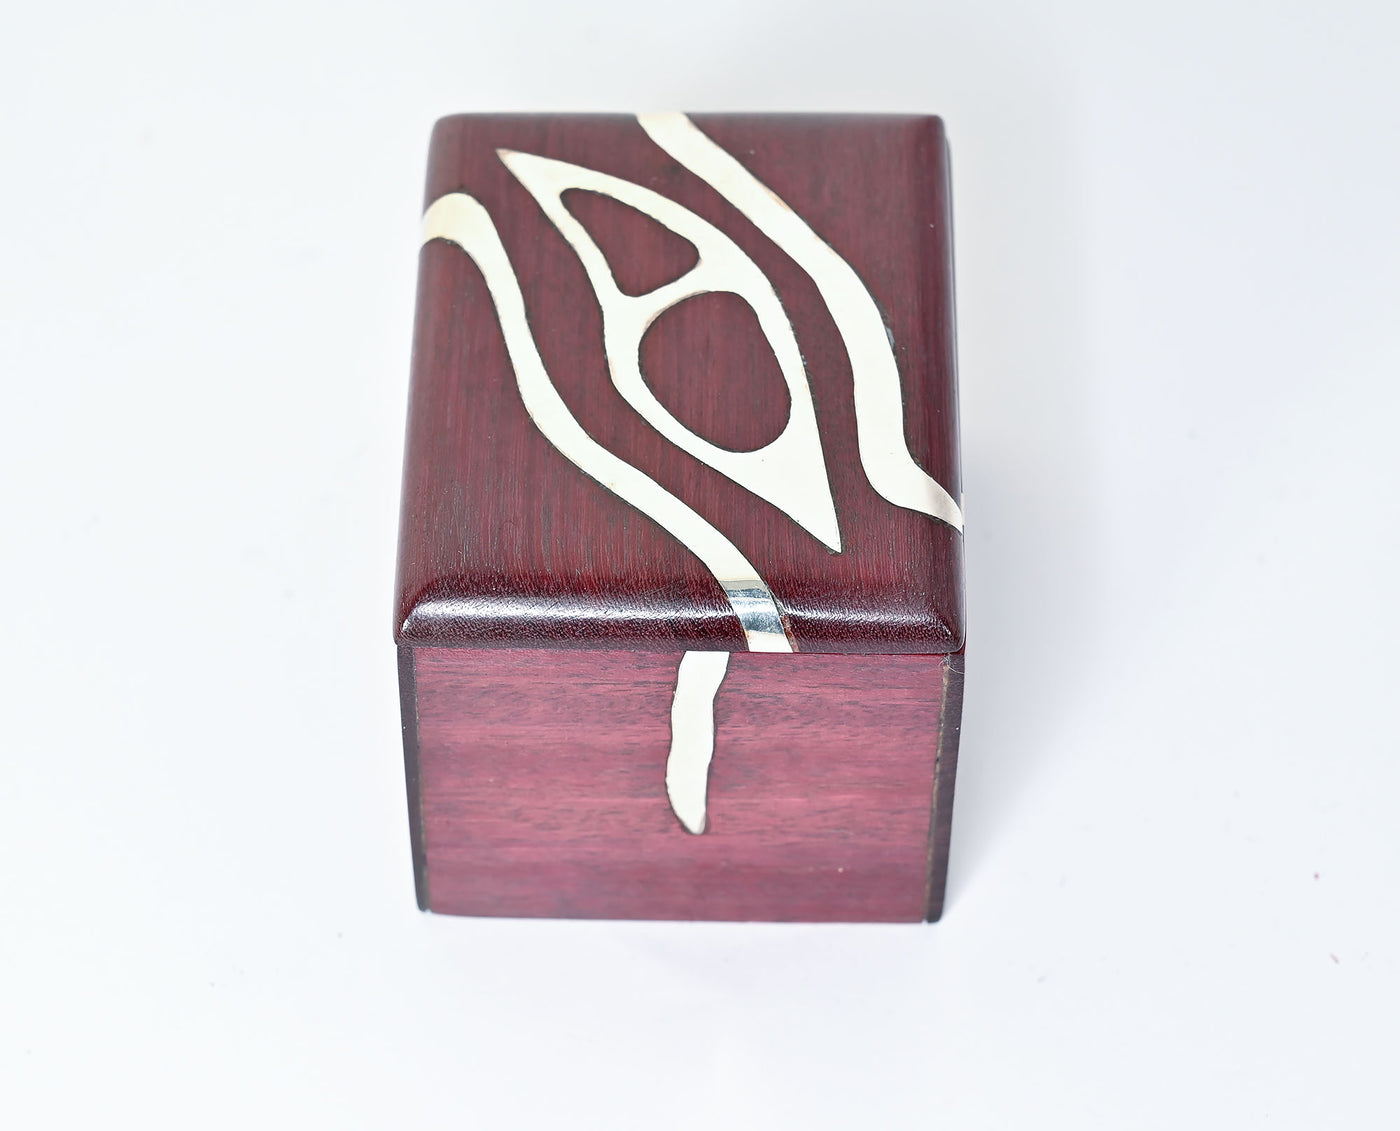 Rosewood and Sterling Silver Small Box